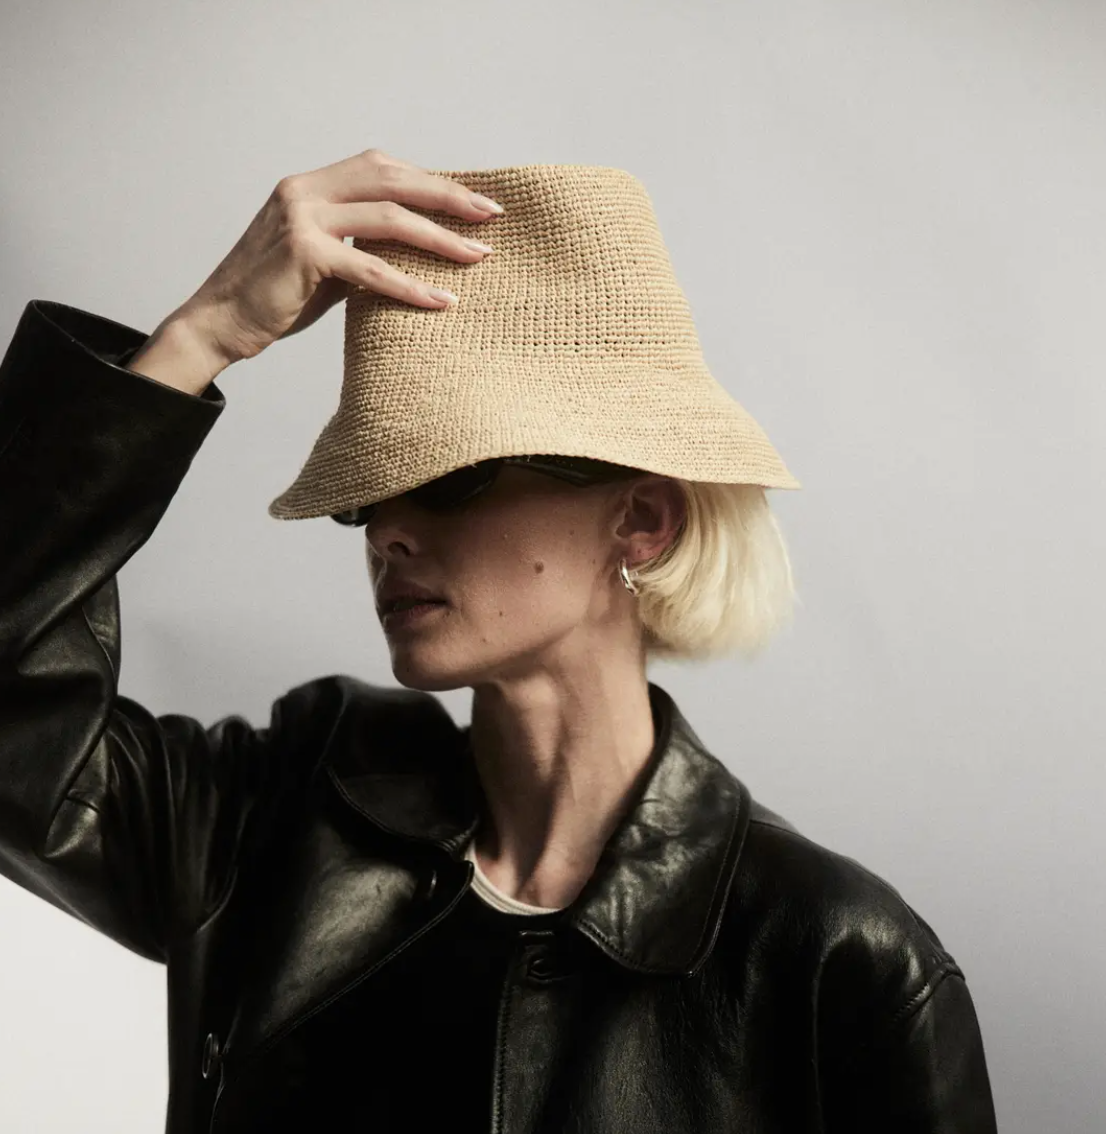 A person in a black leather jacket wearing a wide-brimmed straw hat (FELIX BUCKET NATURAL by Janessa Leone) that covers their eyes, set against an Arizona-inspired background. The person is touching the brim of the hat with one hand.